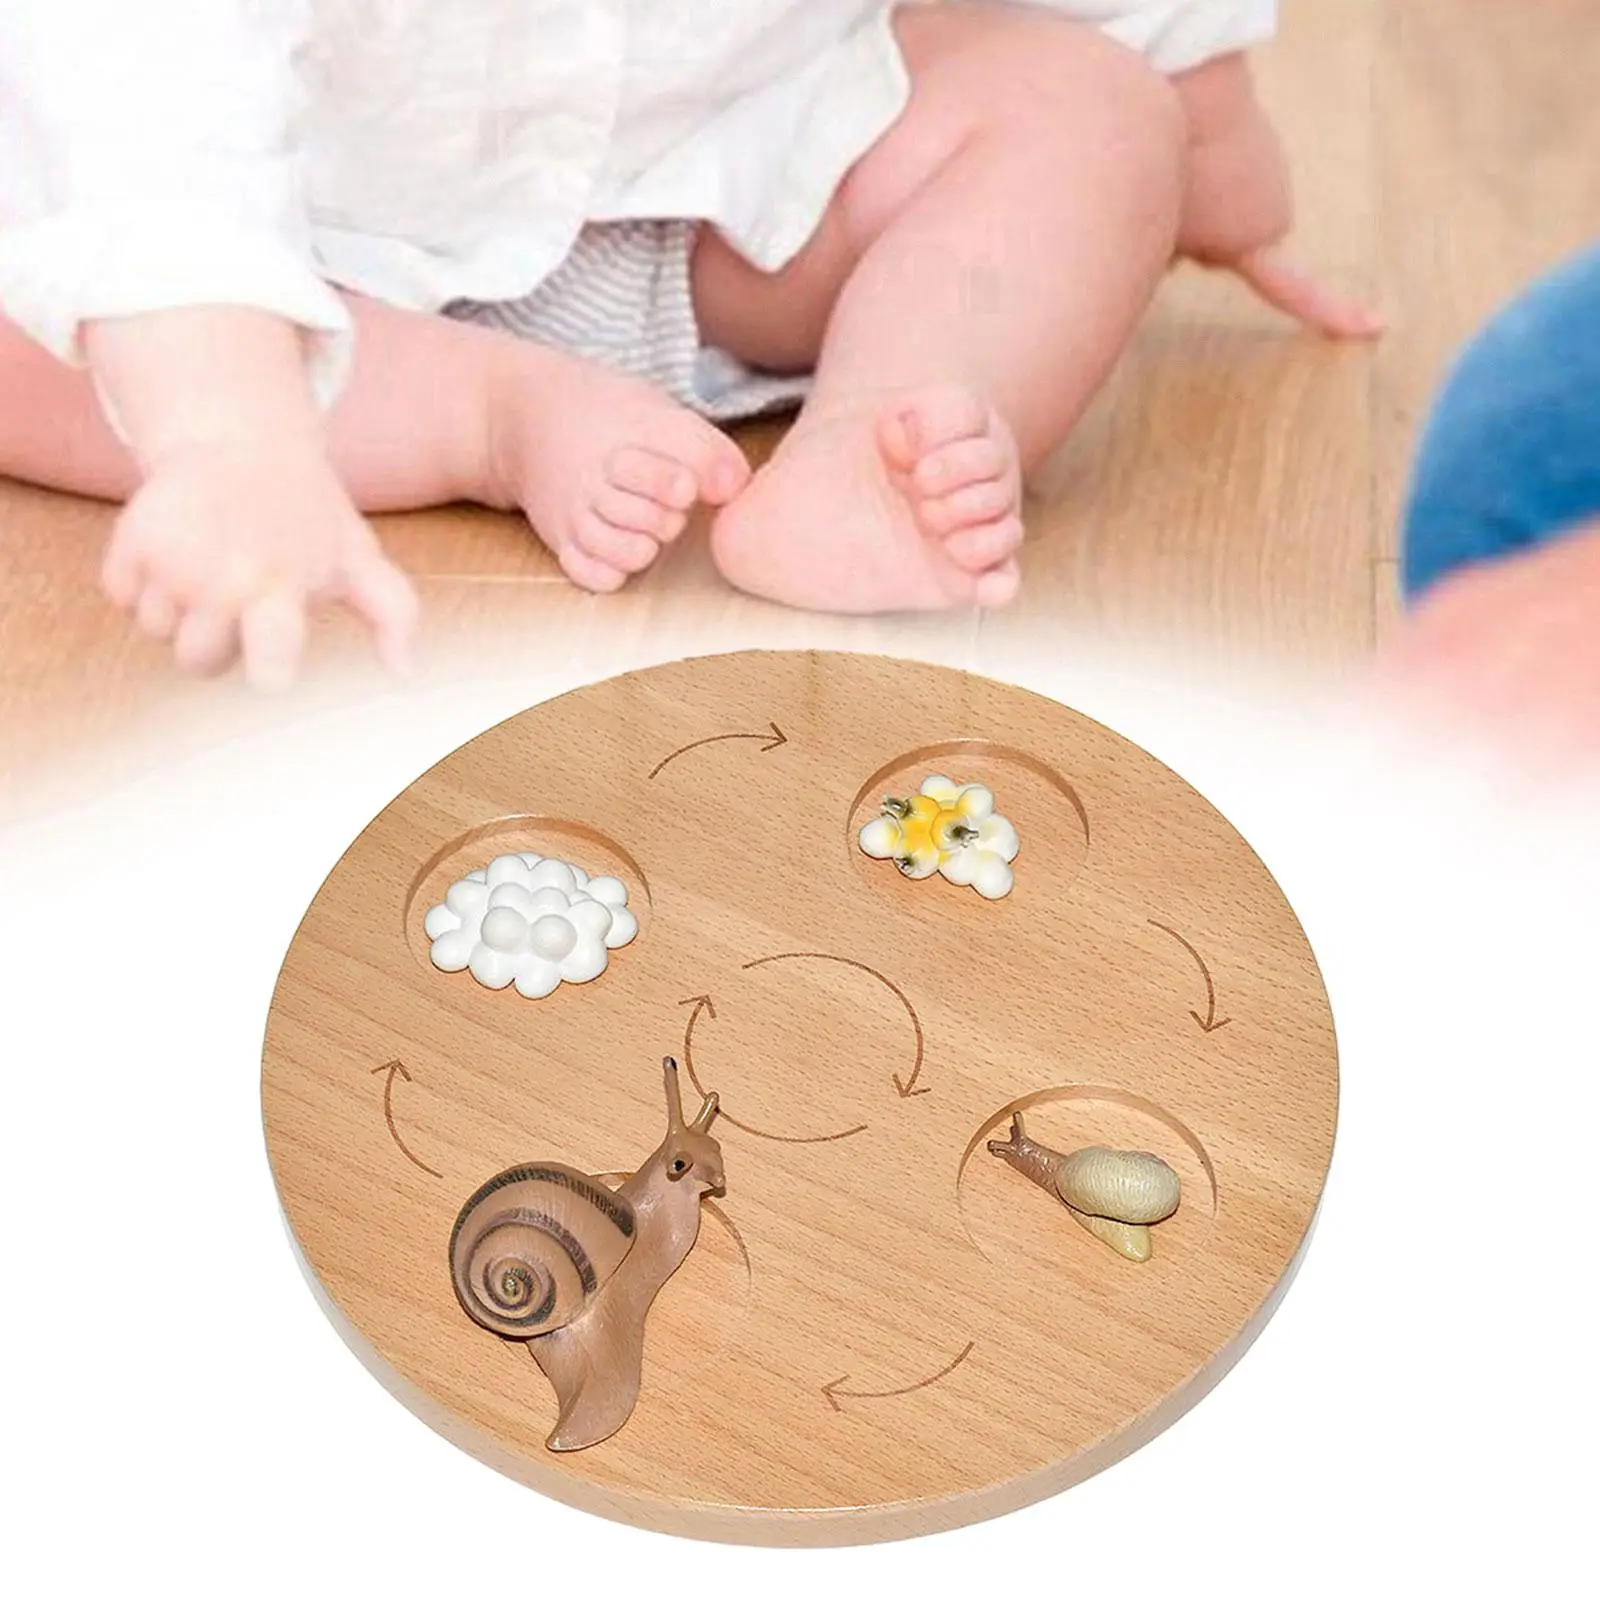 Life Cycle Tray Montessori Toys Educational Realistic Birthday Gifts Teaching Aids for Boys Girls Sensory Toy Cognitive Toy